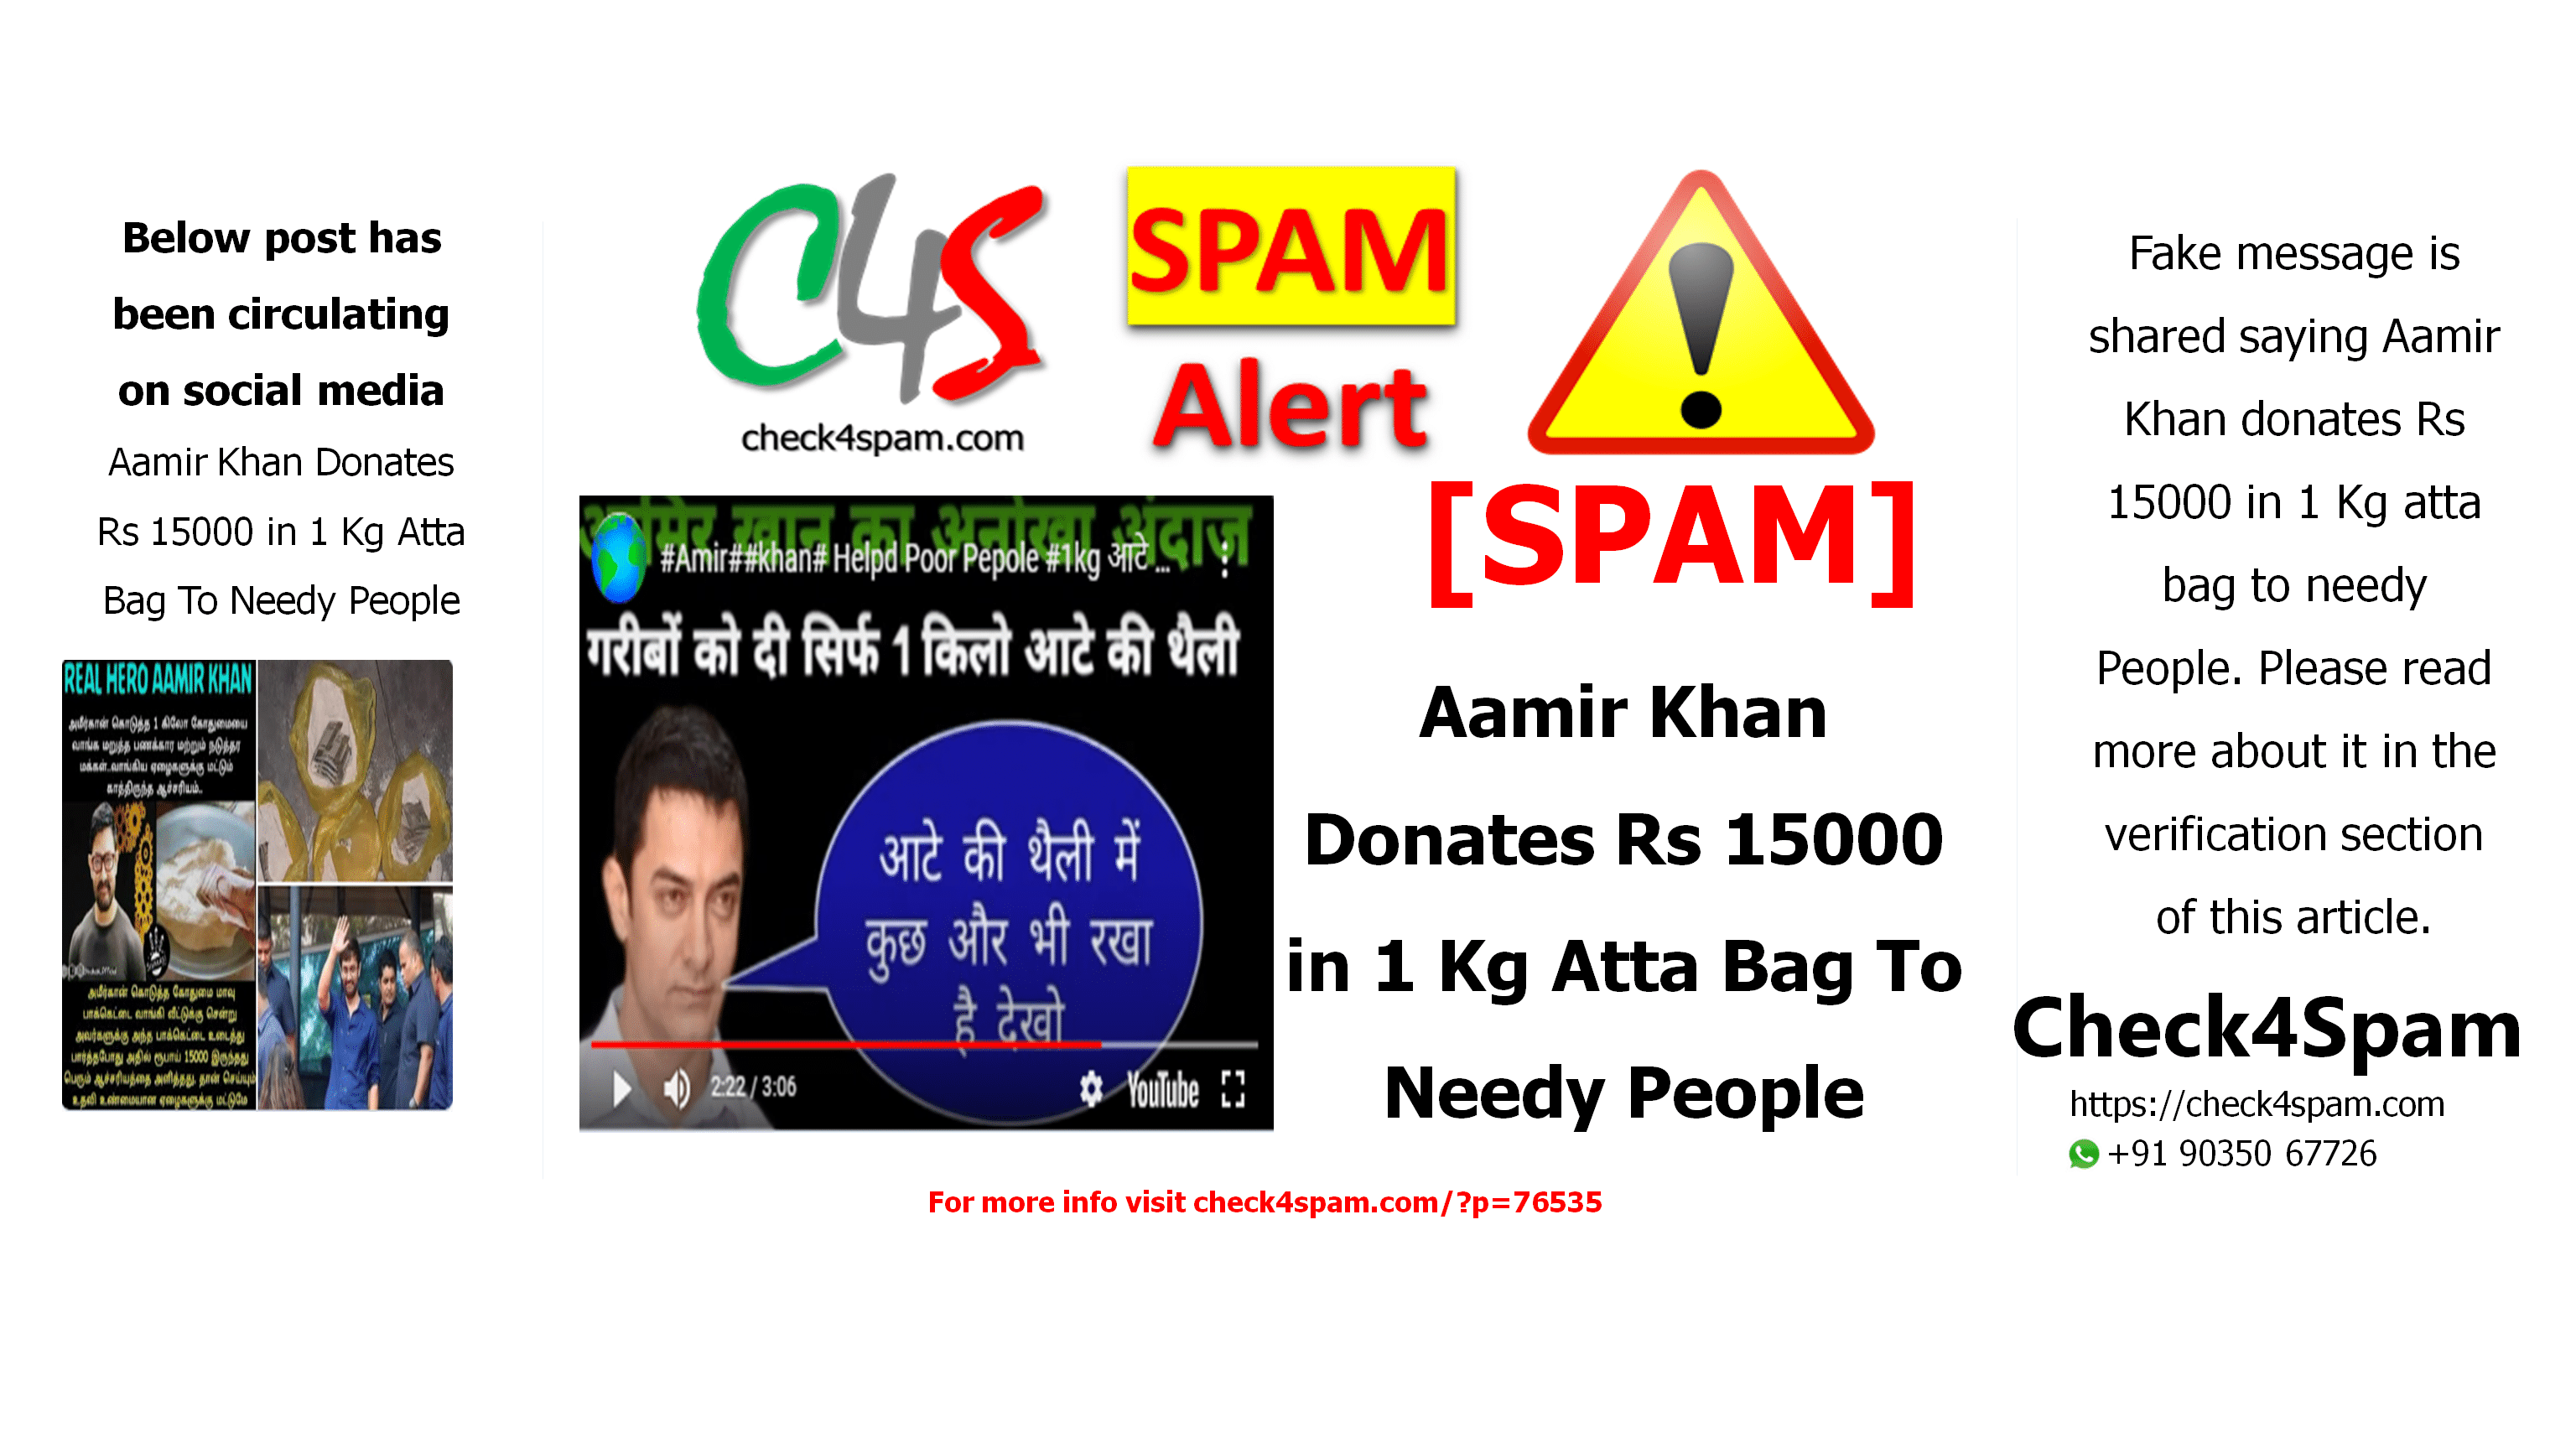 Aamir Khan Donates Rs 15000 in 1 Kg Atta Bag To Needy People